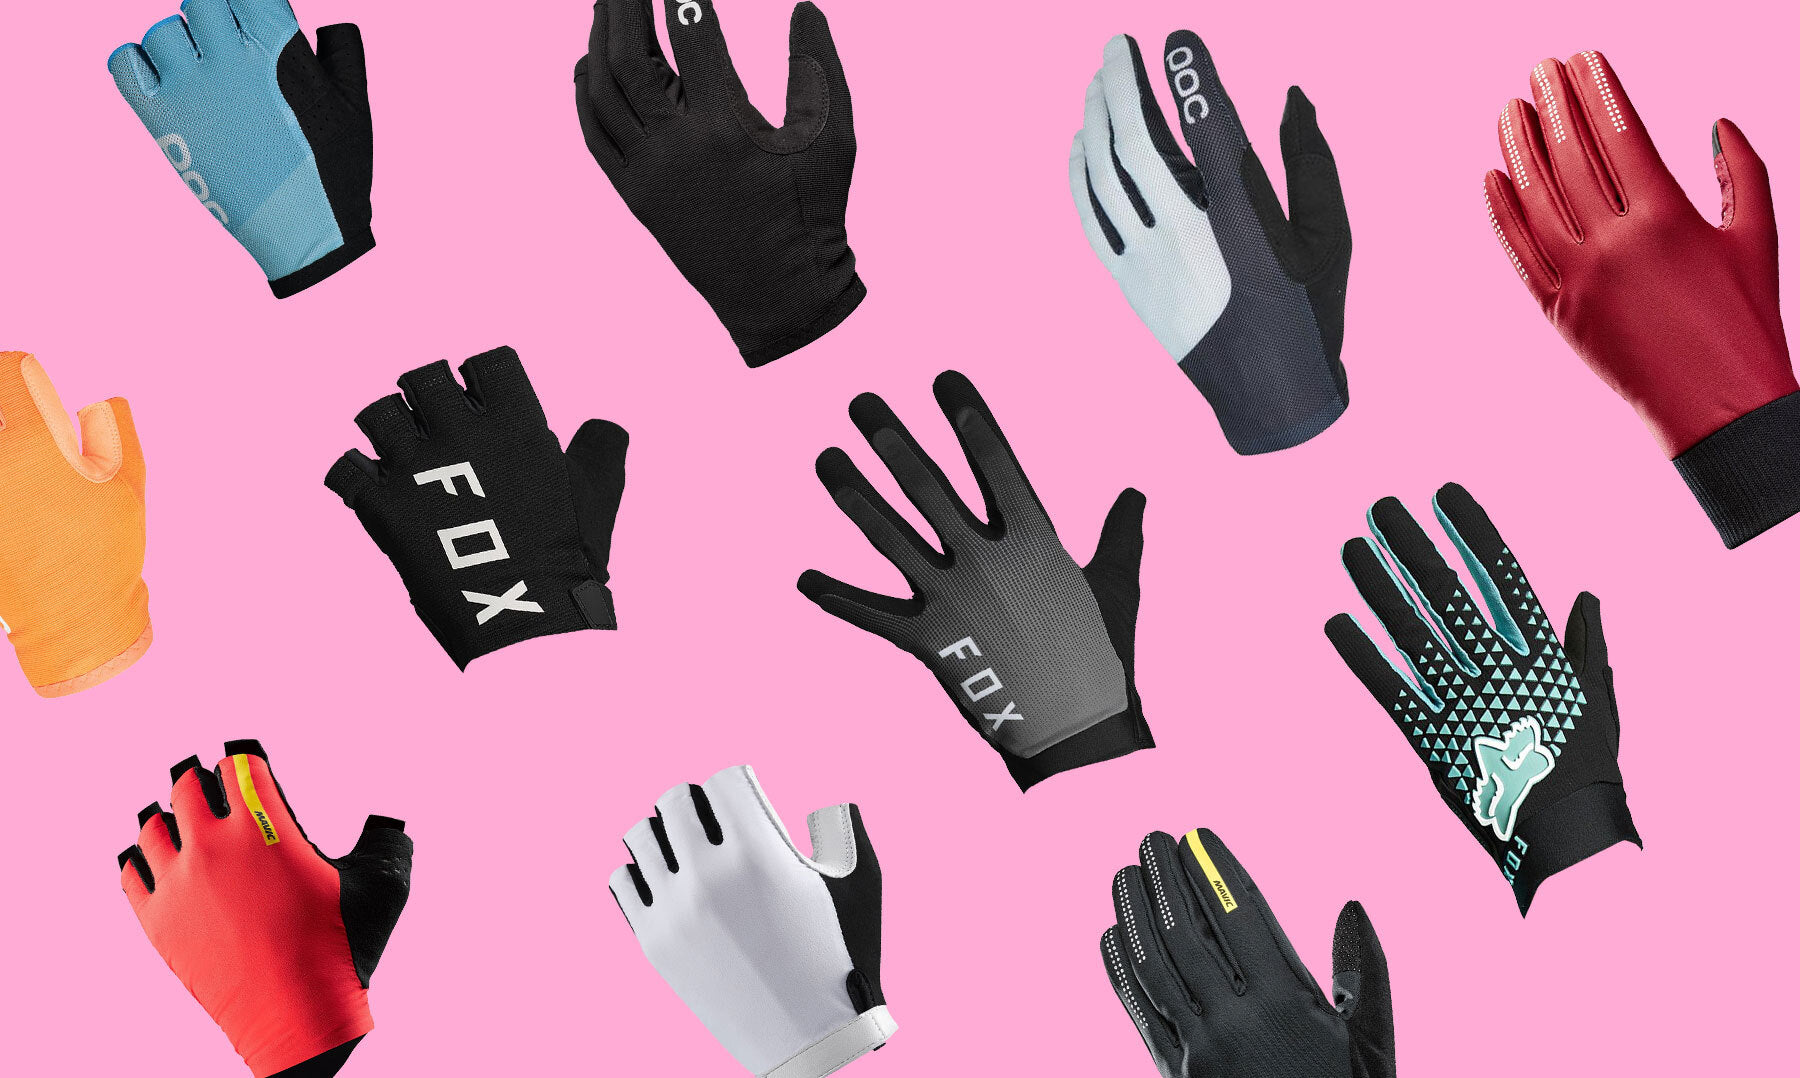 Riding Gloved Vs Gloveless Why Do Pros Not Wear Them? Are They Worth it For You? The Pros Closet